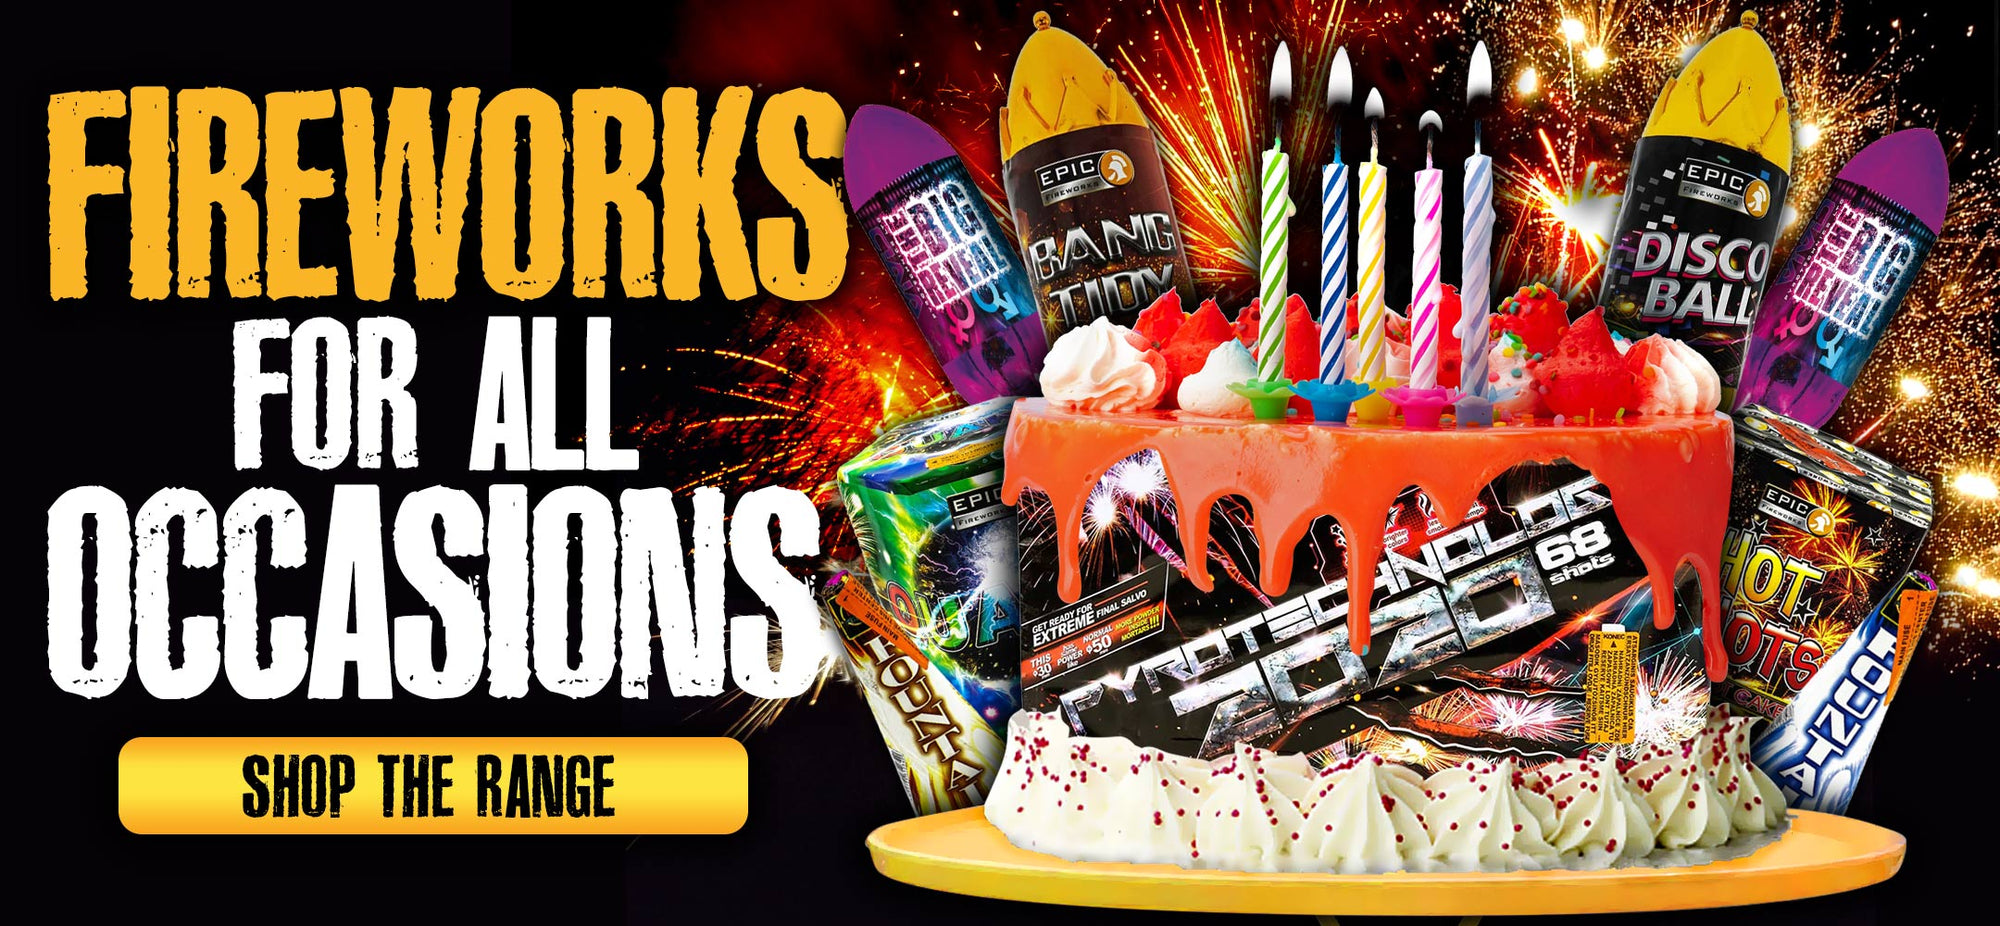 Image has text which reads, 'fireworks for all occasions, shop the range'. Next to the text is an image of a barrage that has been iced to look like a celebration cake with candles in the top. Behind this are lots of different fireworks and firework explosions.